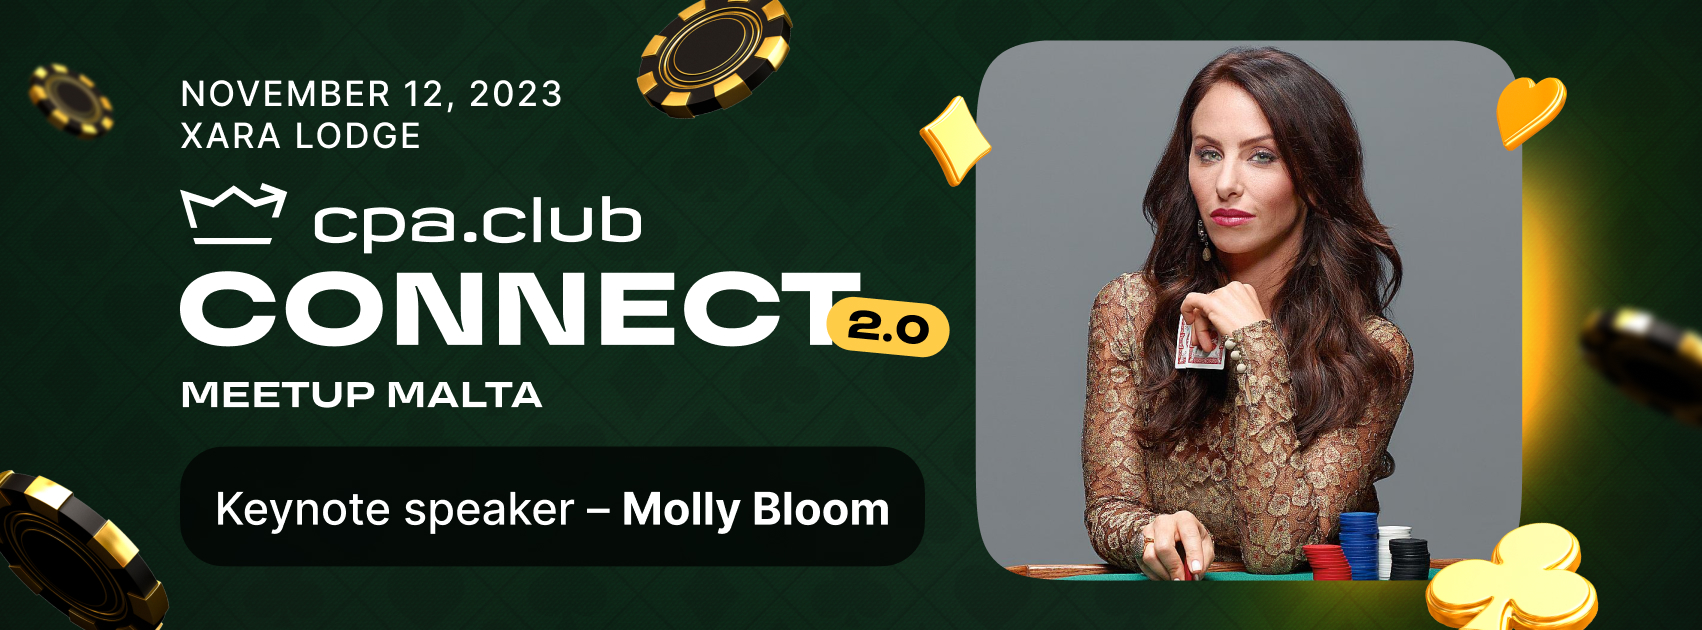 CPA.CLUB CONNECT 2.0 - Cover